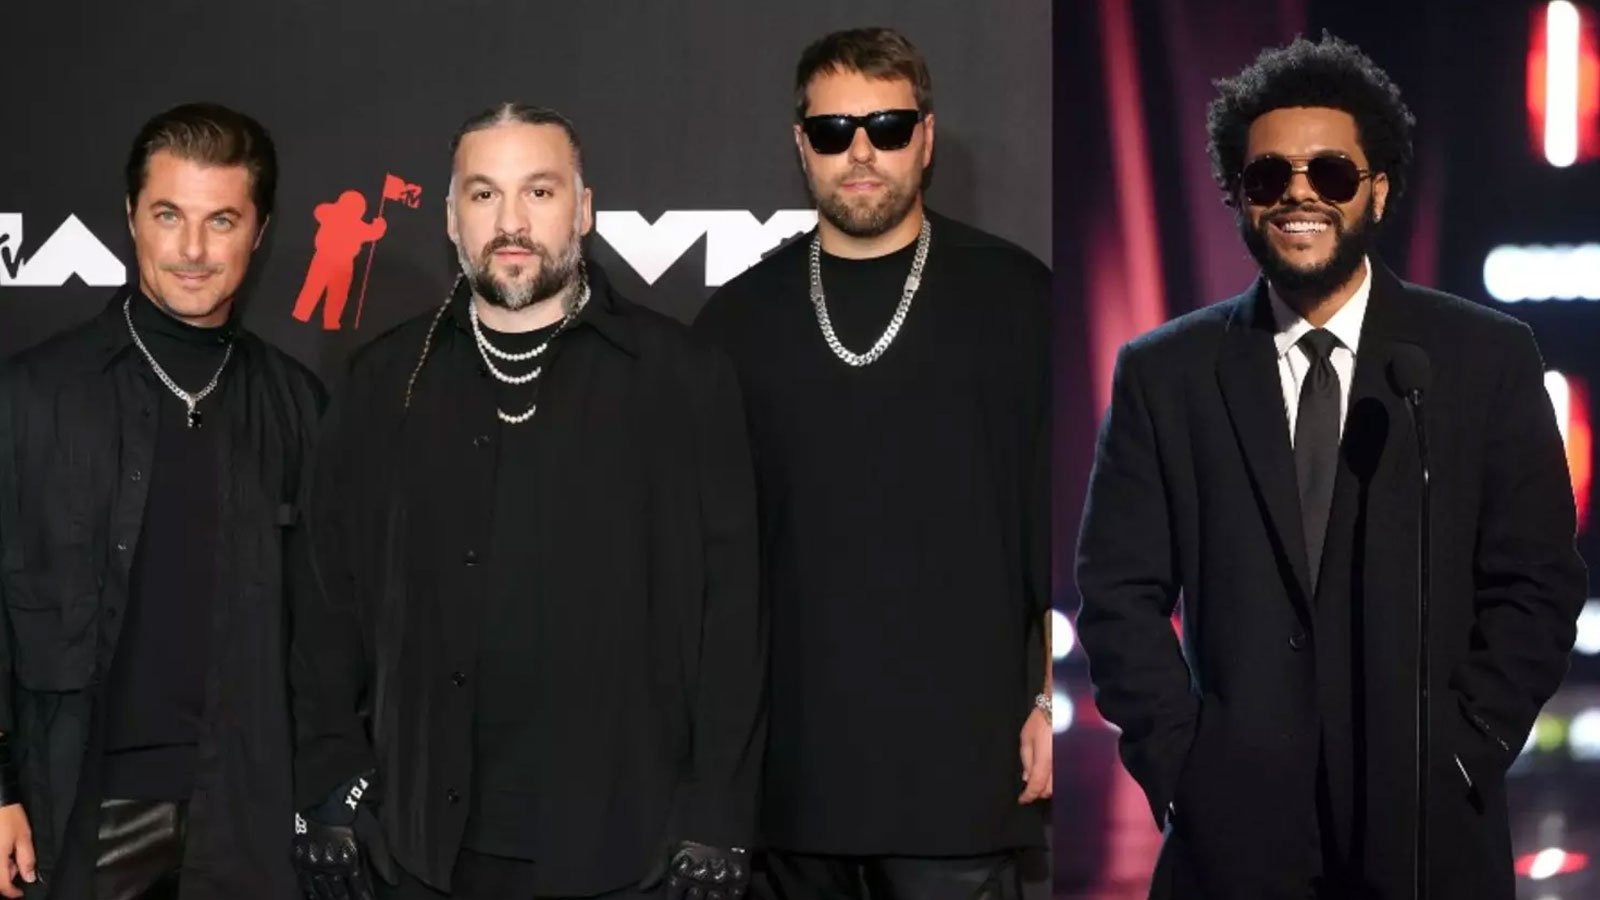 The Weeknd and Swedish House Mafia wow fans with powerful performances at Coachella music festival